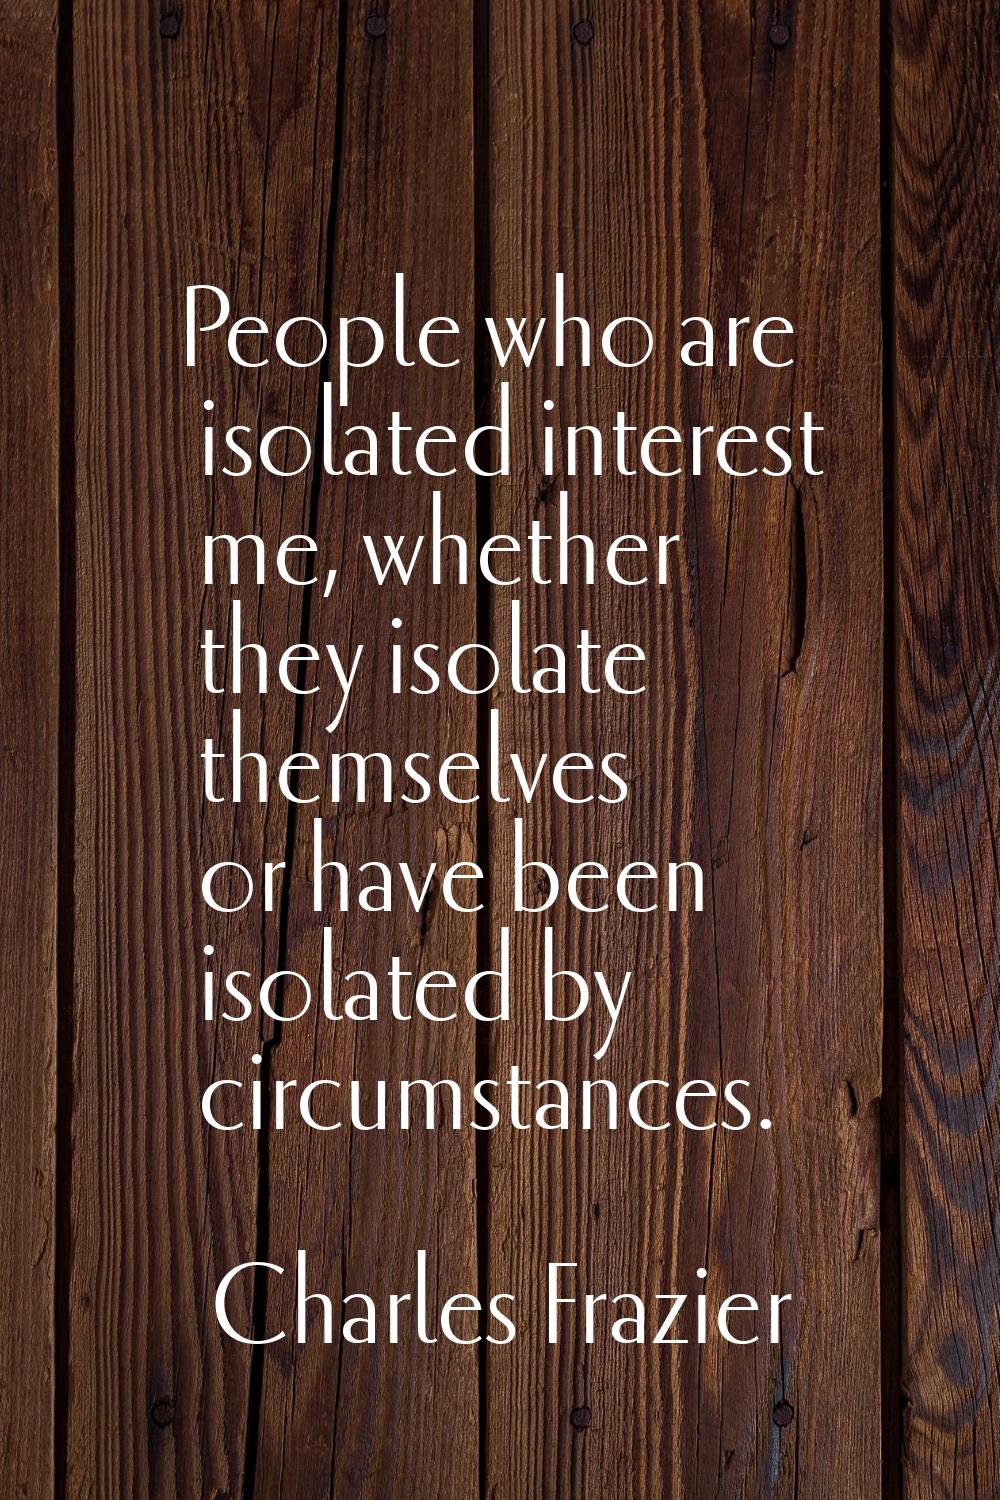 People who are isolated interest me, whether they isolate themselves or have been isolated by circu